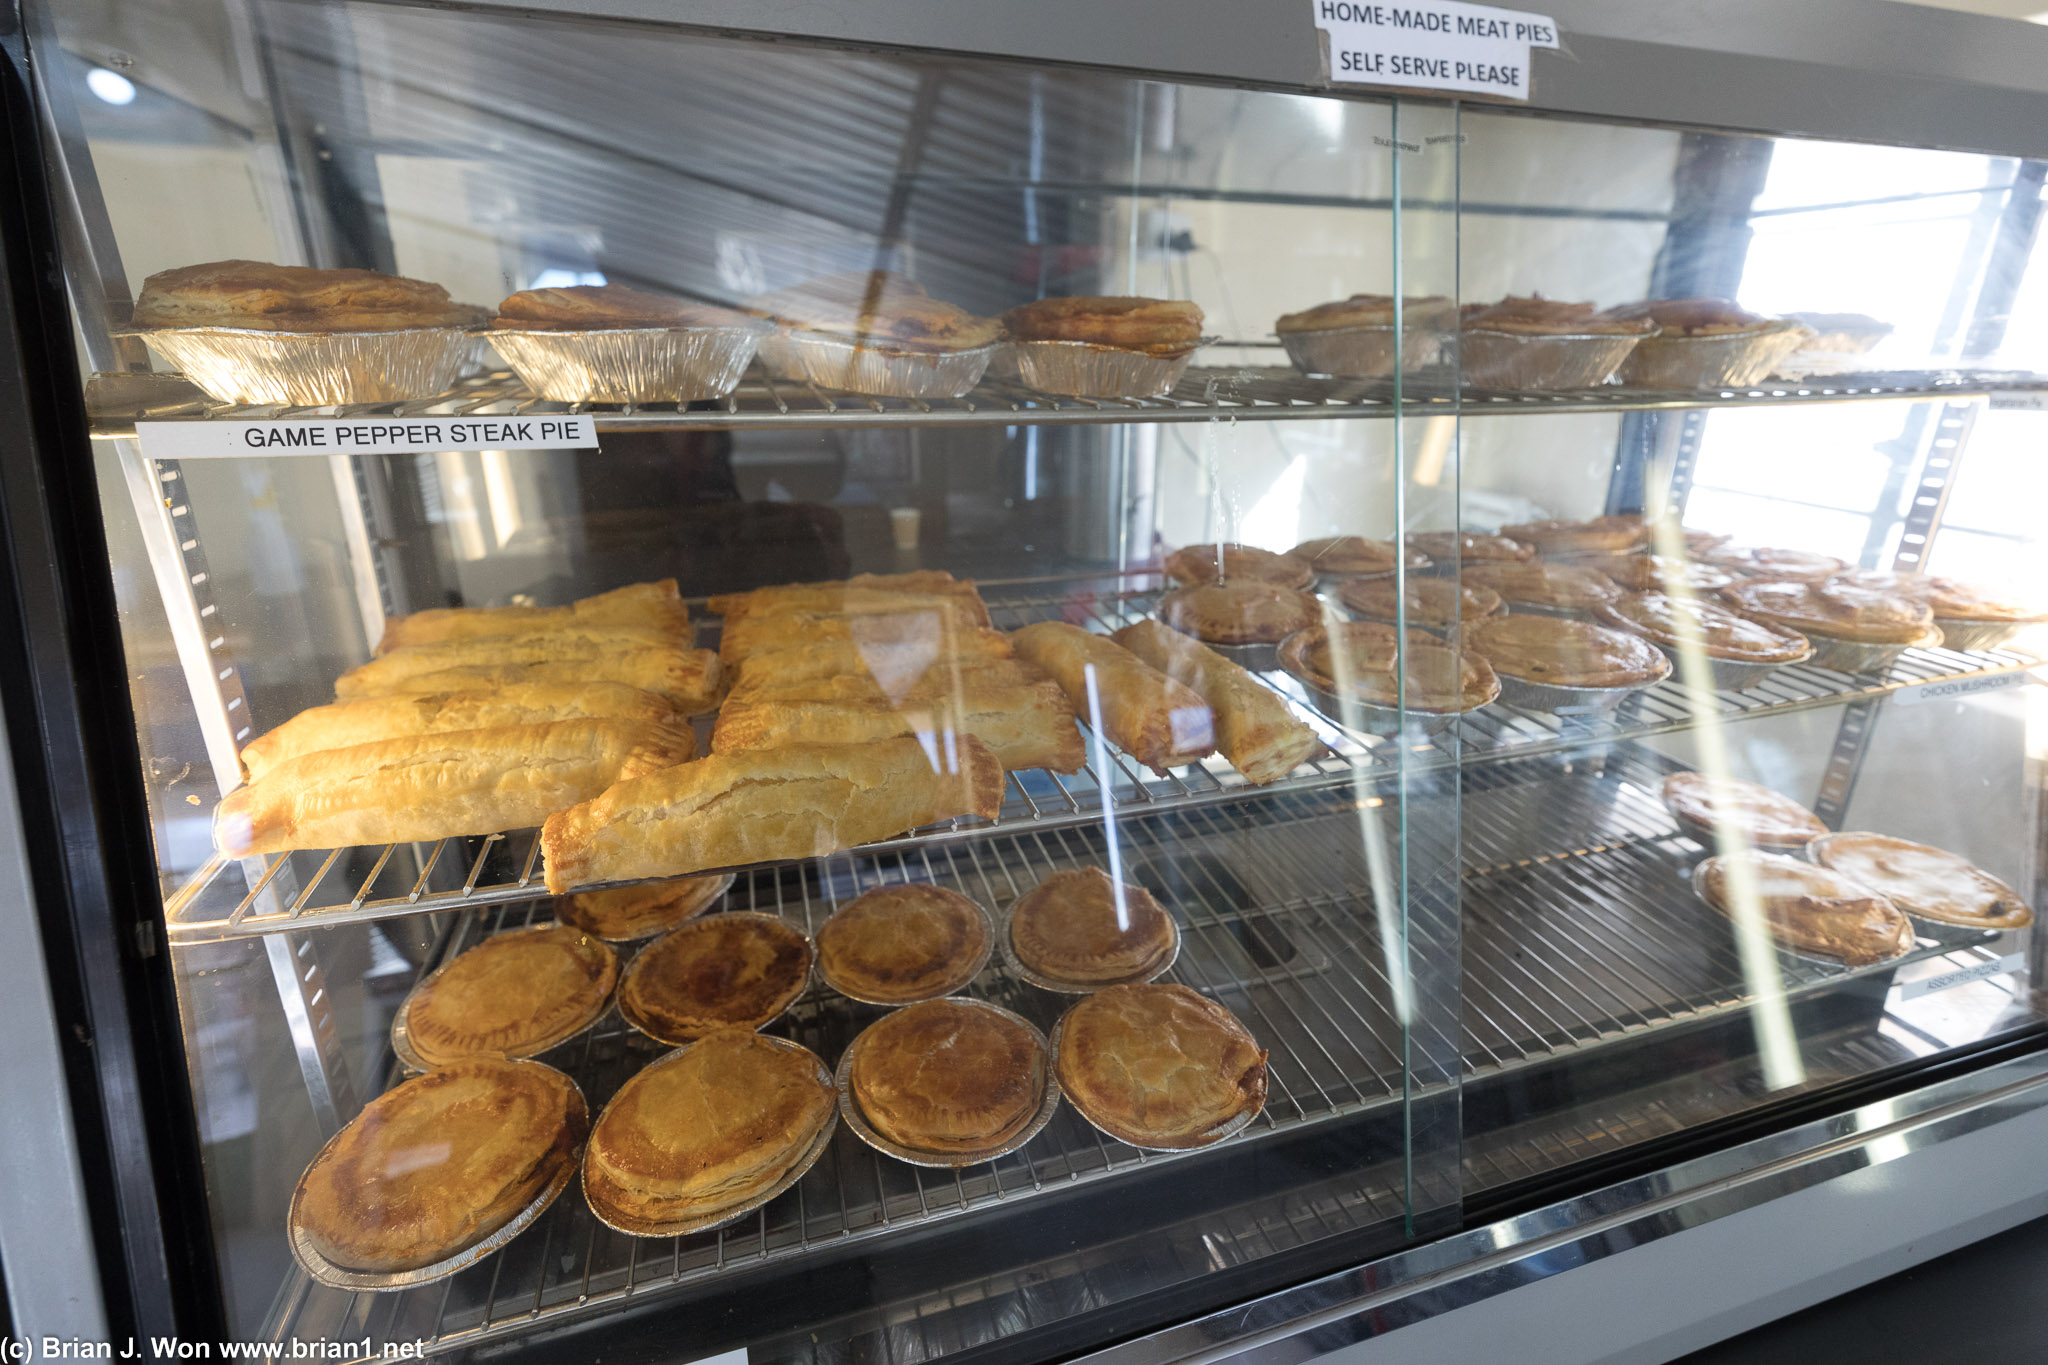 Morning means a full load of meat pies at Moose McGregor's Bakery.